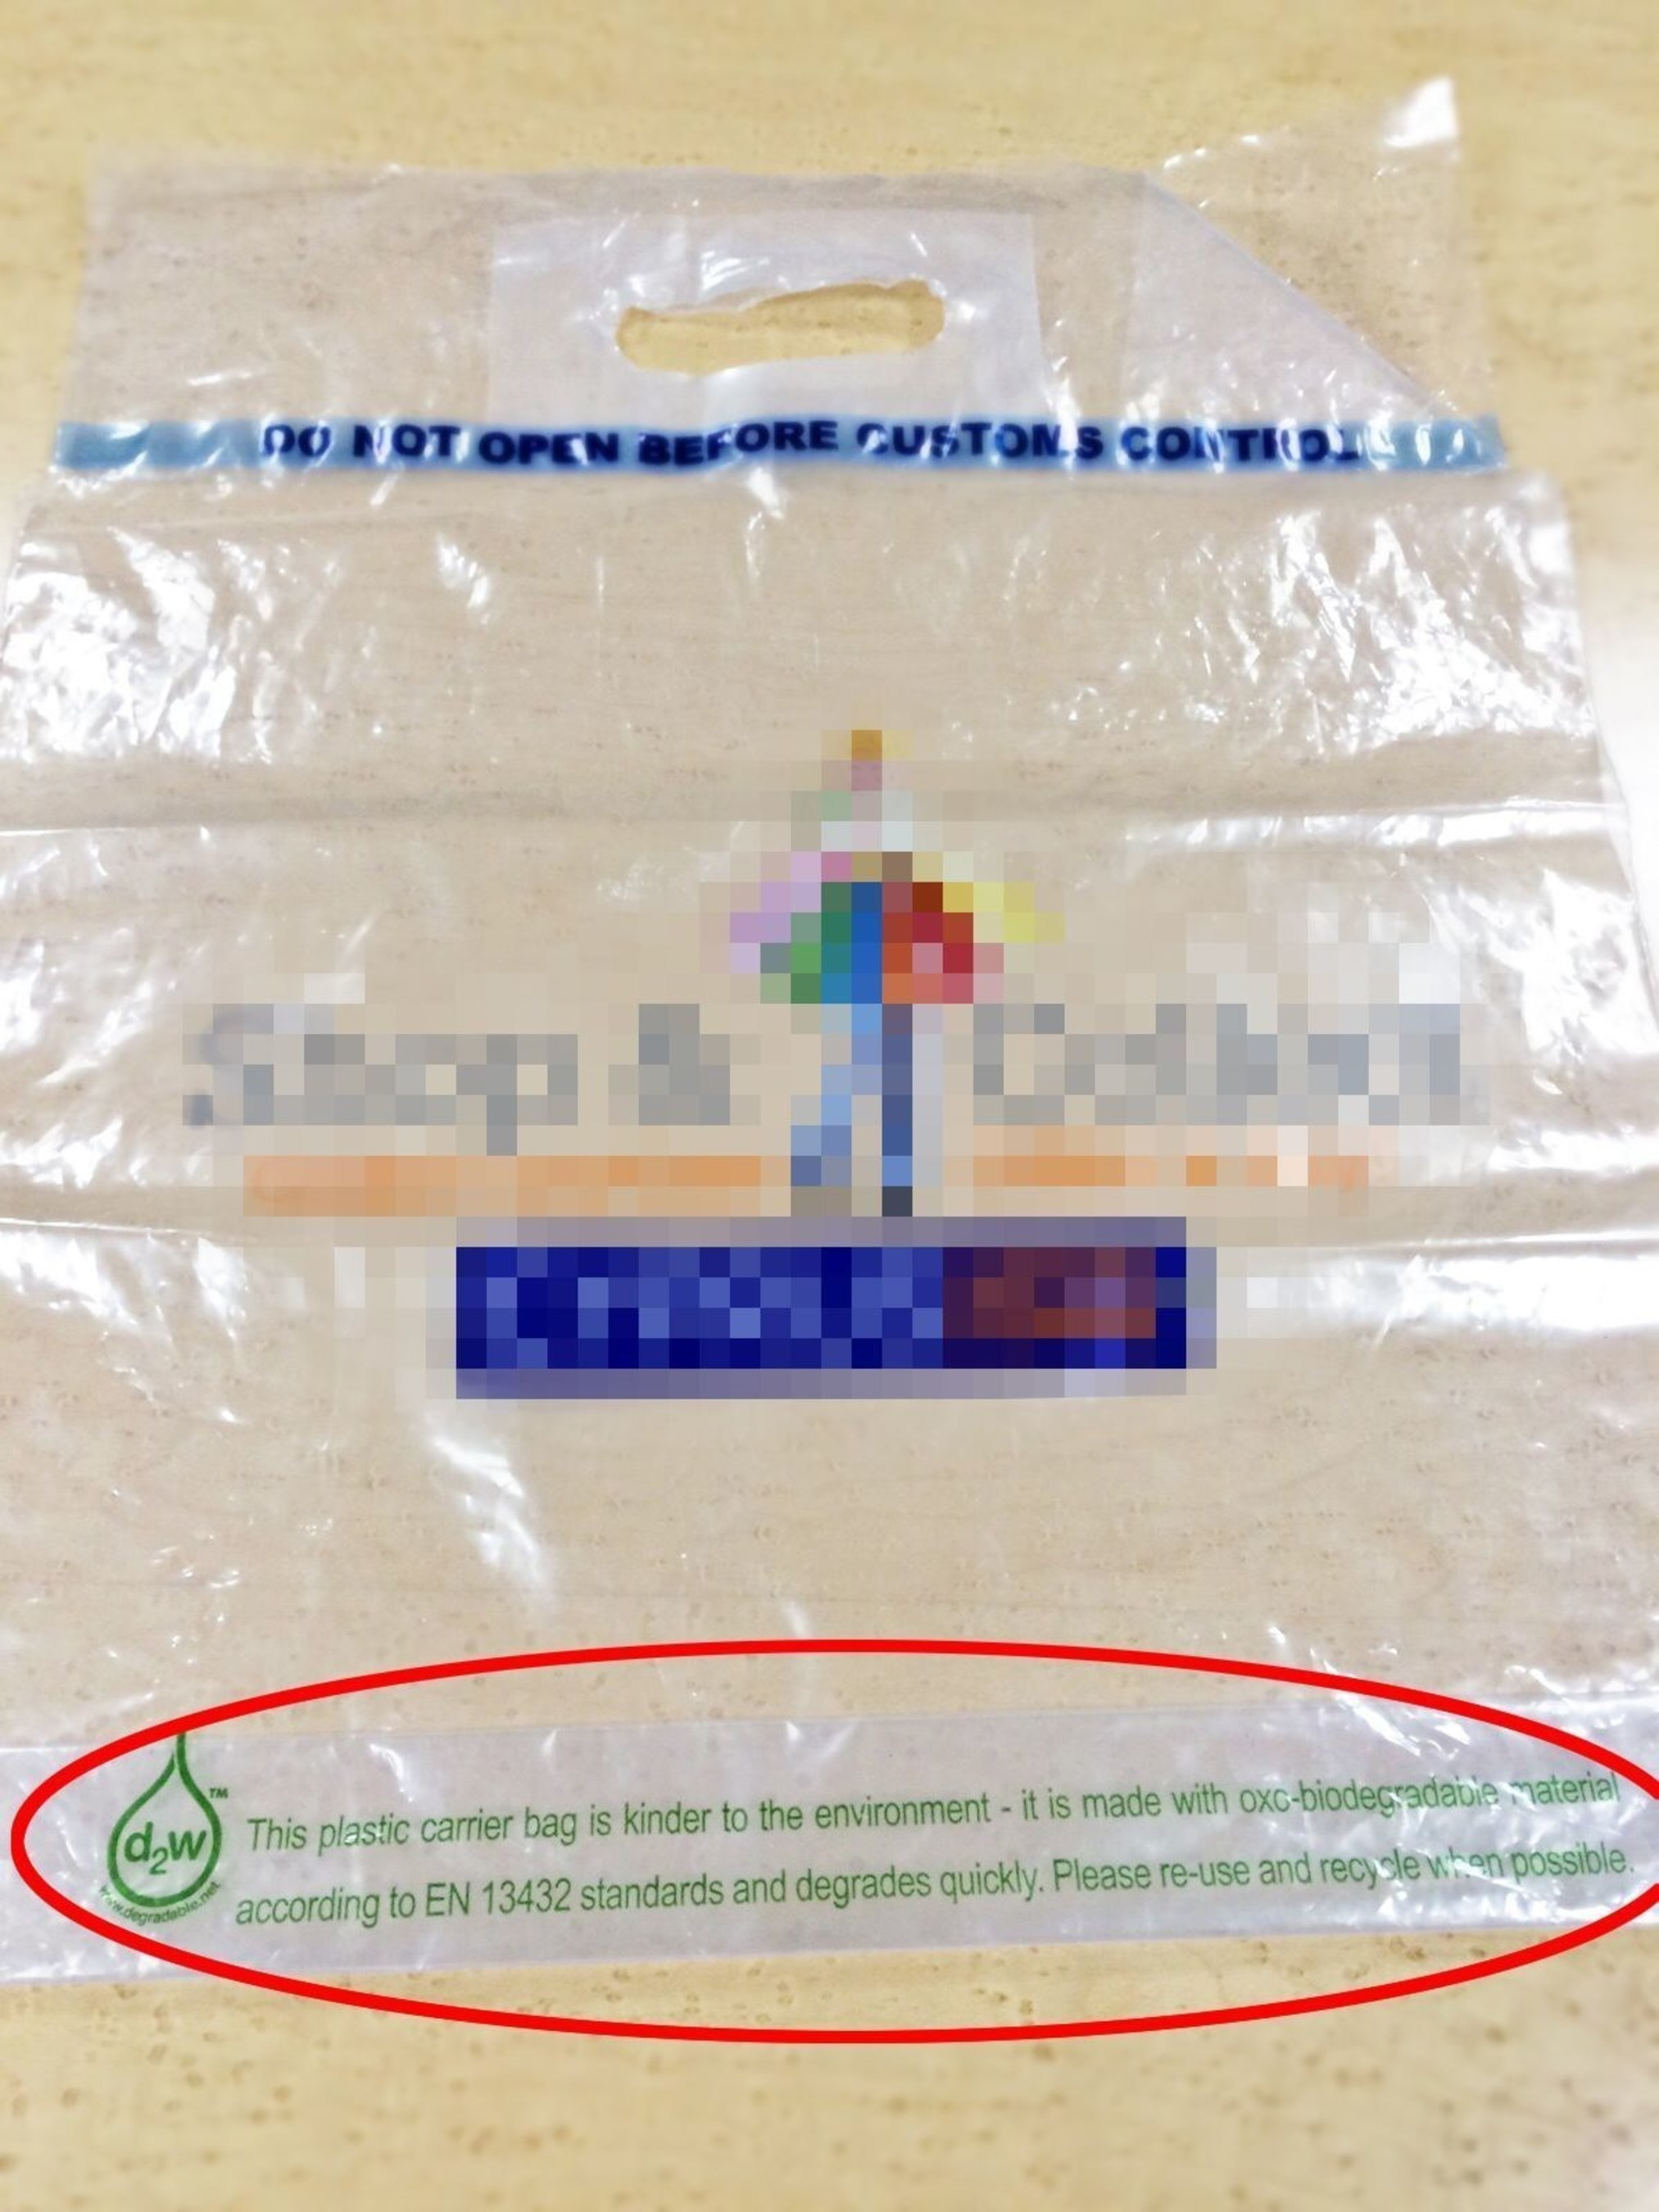 Misleading marketing claim: Shopping bag made from "oxo-degradable material" wrongly claims accordance to EN 13432. (Image taken in August 2015, (C) European Bioplastics) (PRNewsFoto/European Bioplastics) (PRNewsFoto/European Bioplastics)